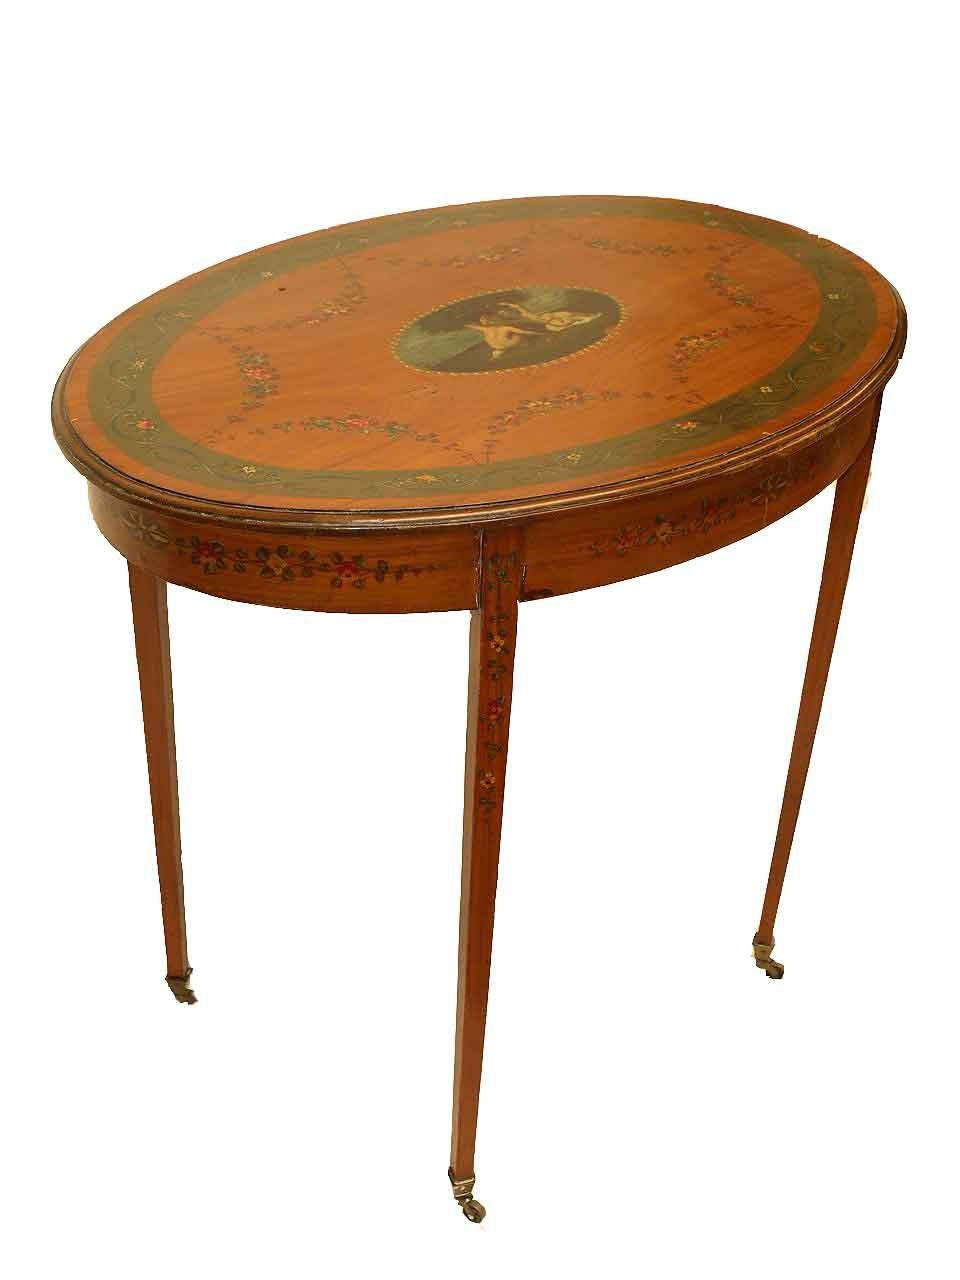 French painted satinwood center table, the top border with flowers and foliate intertwined with stylized ribbon on a verde band, inside this are connected arches of flowers and foliate; central cartouche features two nymphs picking apples from an